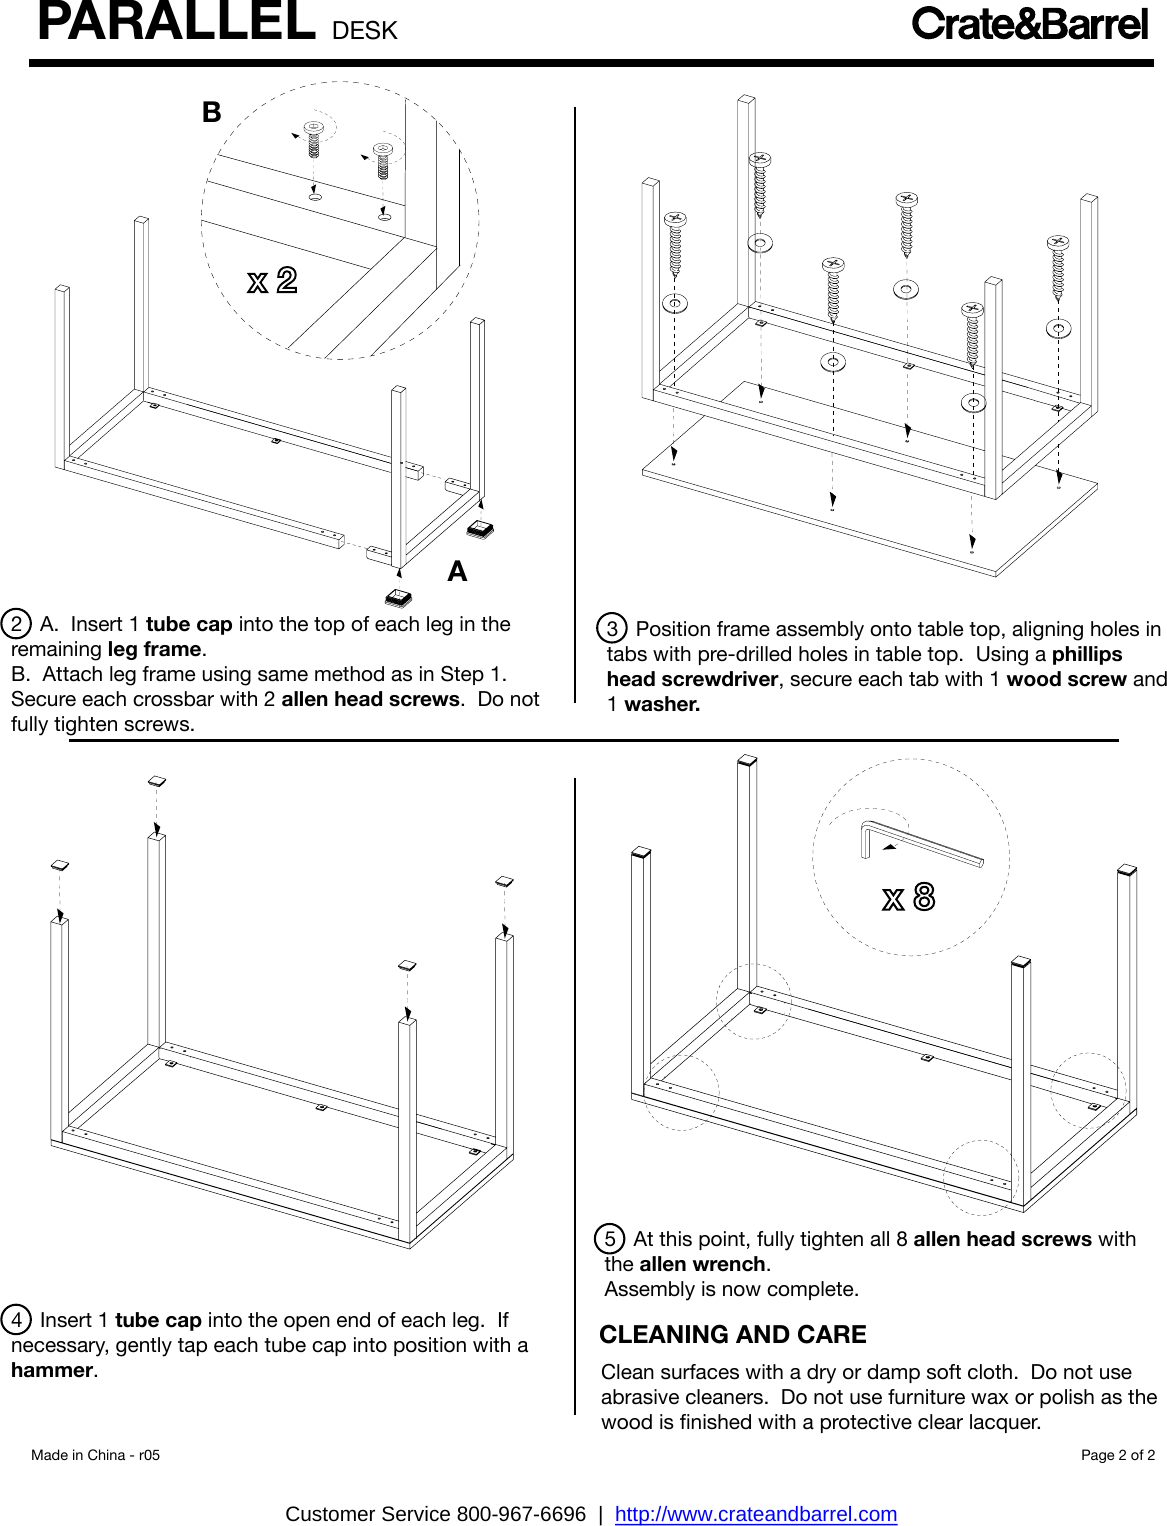 Page 2 of 2 - Crate-Barrel 756-Parallel-Desk Parallel Desk Assembly Instructions From Crate And Barrel